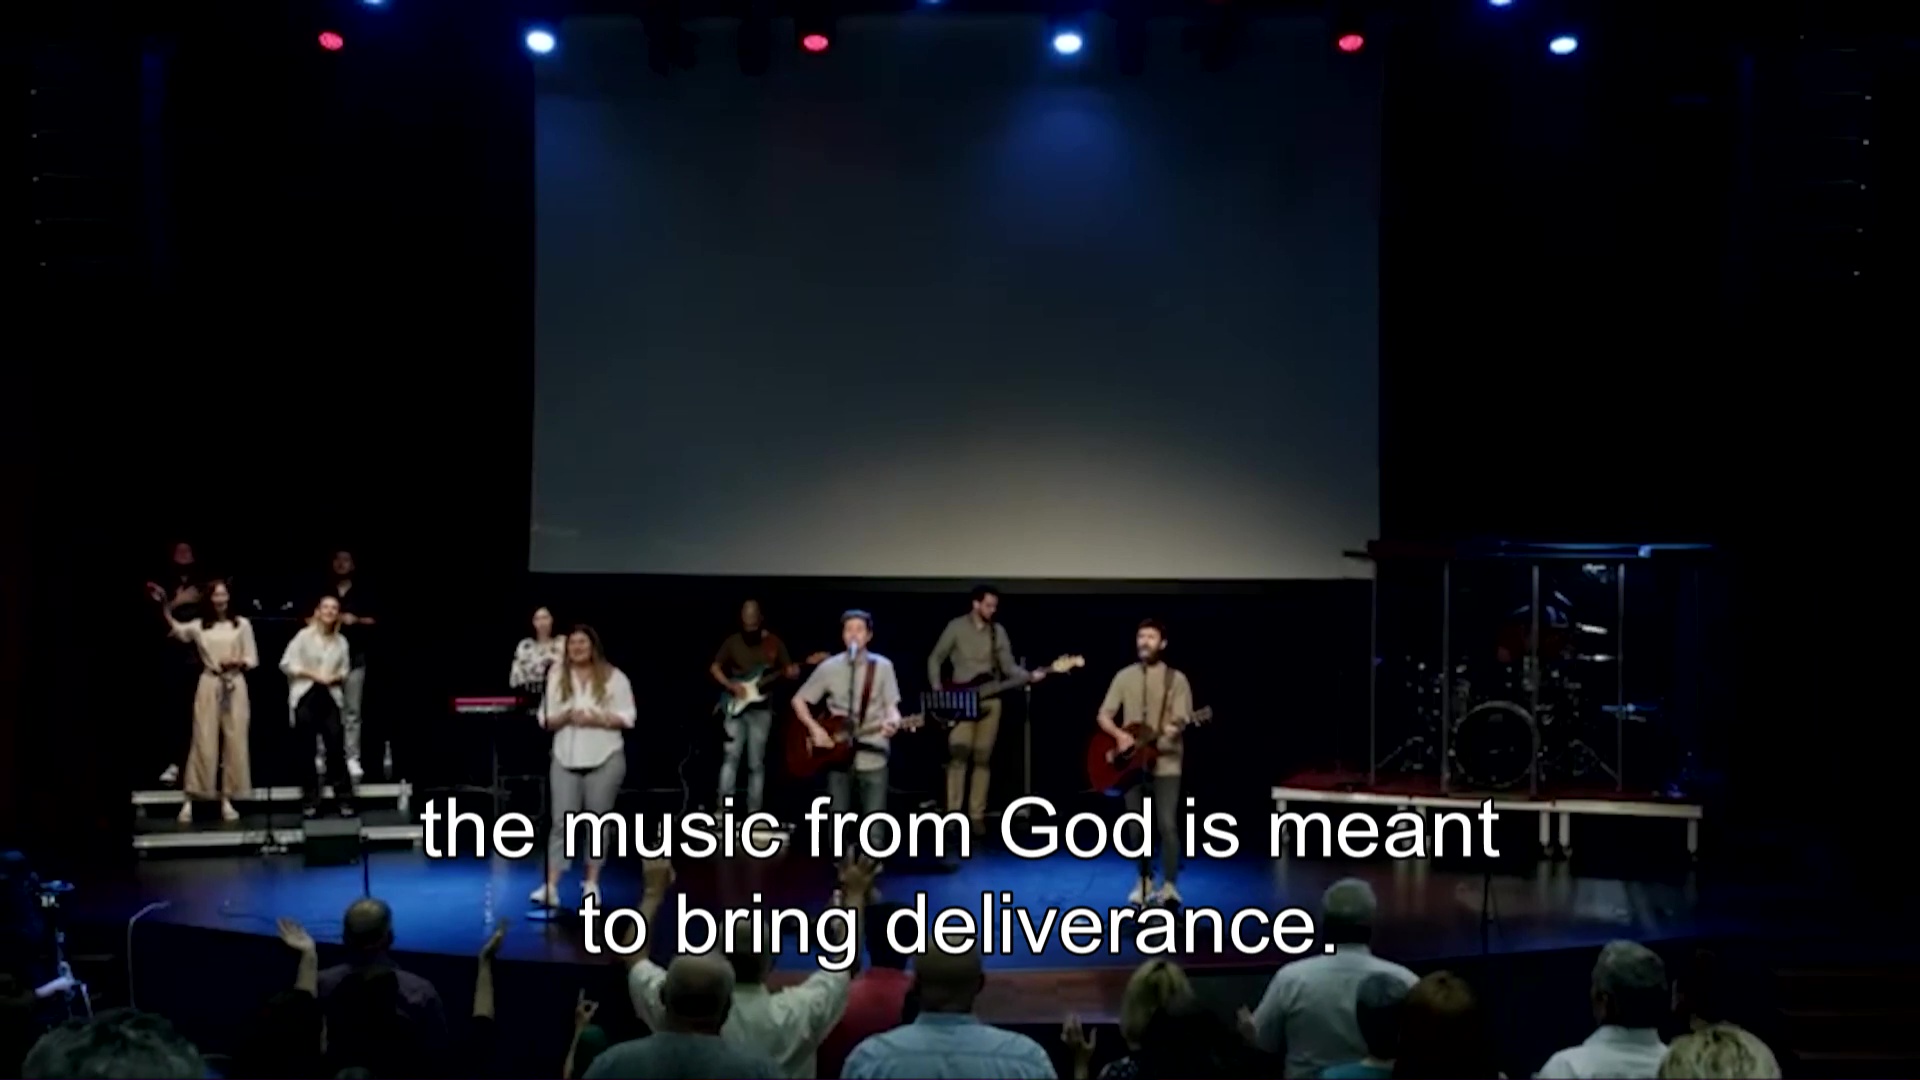 Philadelphia Church's mission of bringing a new song to Romania is put into practice by the church's worship leaders.